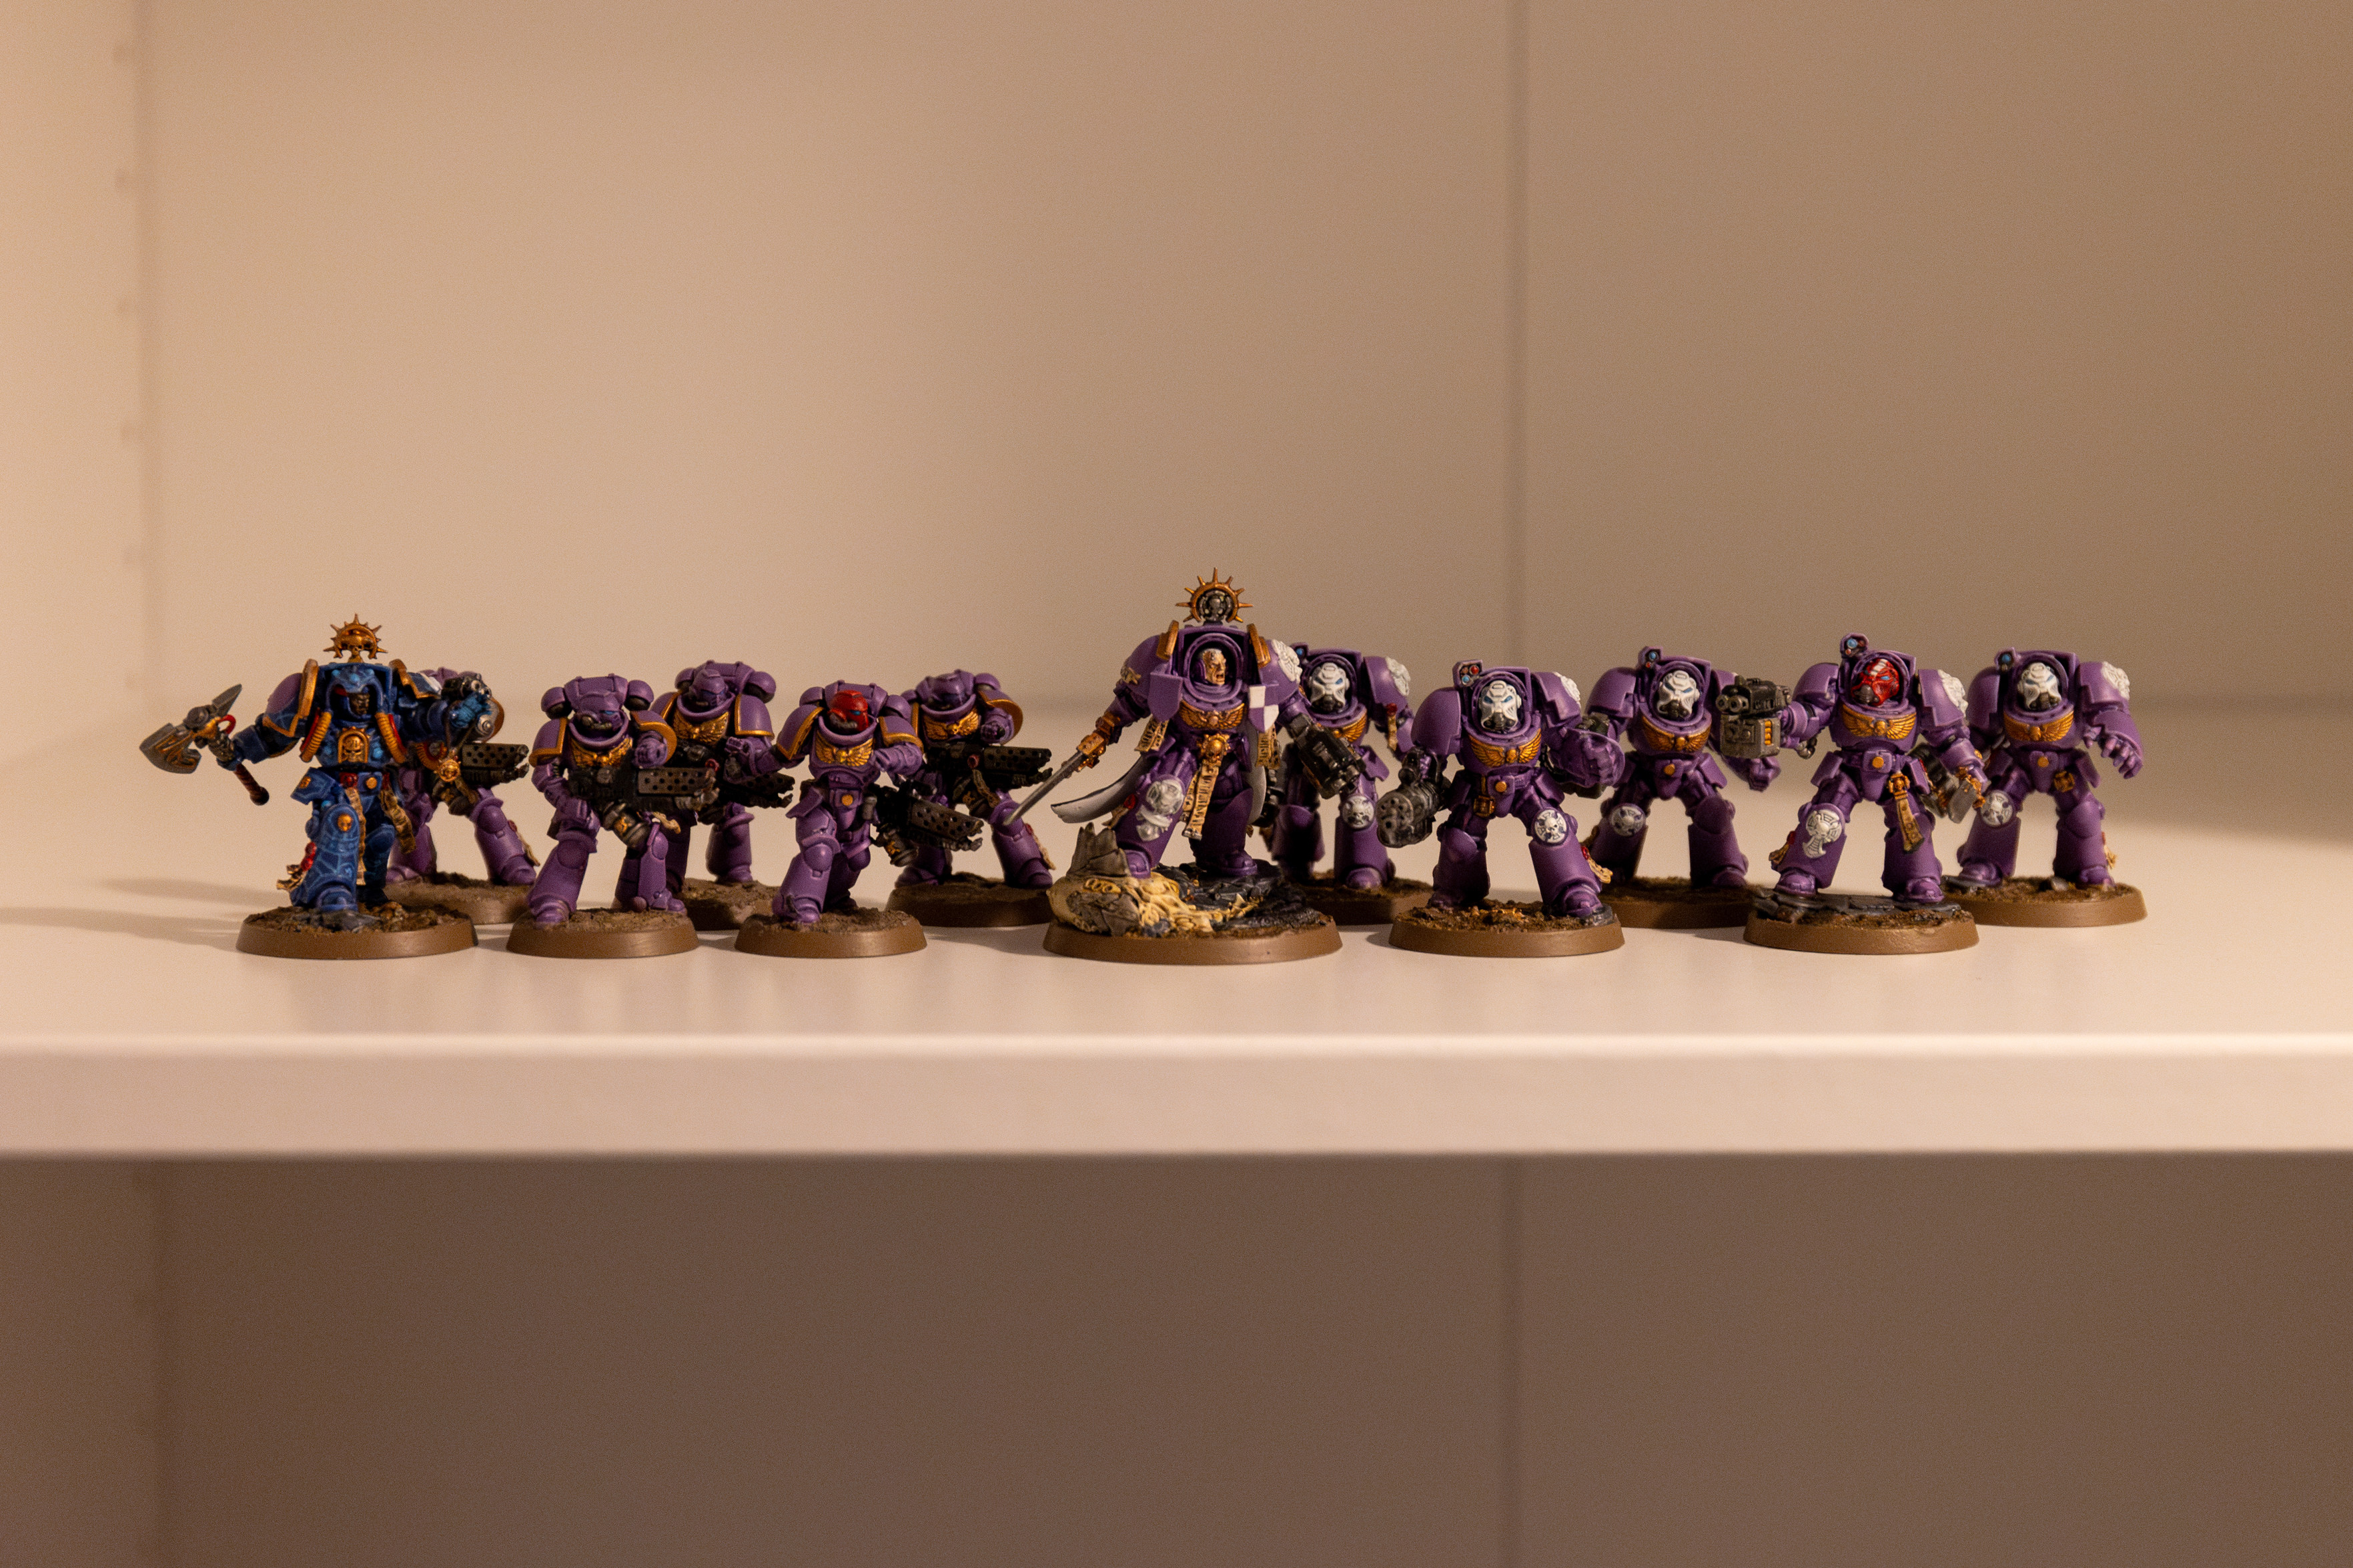 12 Space Marines stood in two ranks. From left to right, there’s a Terminator Librarian in dark blue armour with gold trim. His right hand is behind him, holding an axe and his right hand is upheld and glowing blue. There’s then a squad of 5 Infernus Marines, who are all in purple and gold armour, with the Sergeant having a red helmet. They are all holding a flame thrower. The Sergeant has his strapped behind him and is throwing a grenade. Next is a Captain in Terminator armour. He is in purple and gold armour and is standing on the corpse of a Tyranid and some rocks. He has a gun in his left hand and a sword in his right. To the right of him is a squad of 5 Terminators in purple and gold armour. These have white helmets, except the sergeant, who has a red helmet with a white stripe. The non-Segargent models have guns and powerfits, while the Sergeant has a gun and a sword.